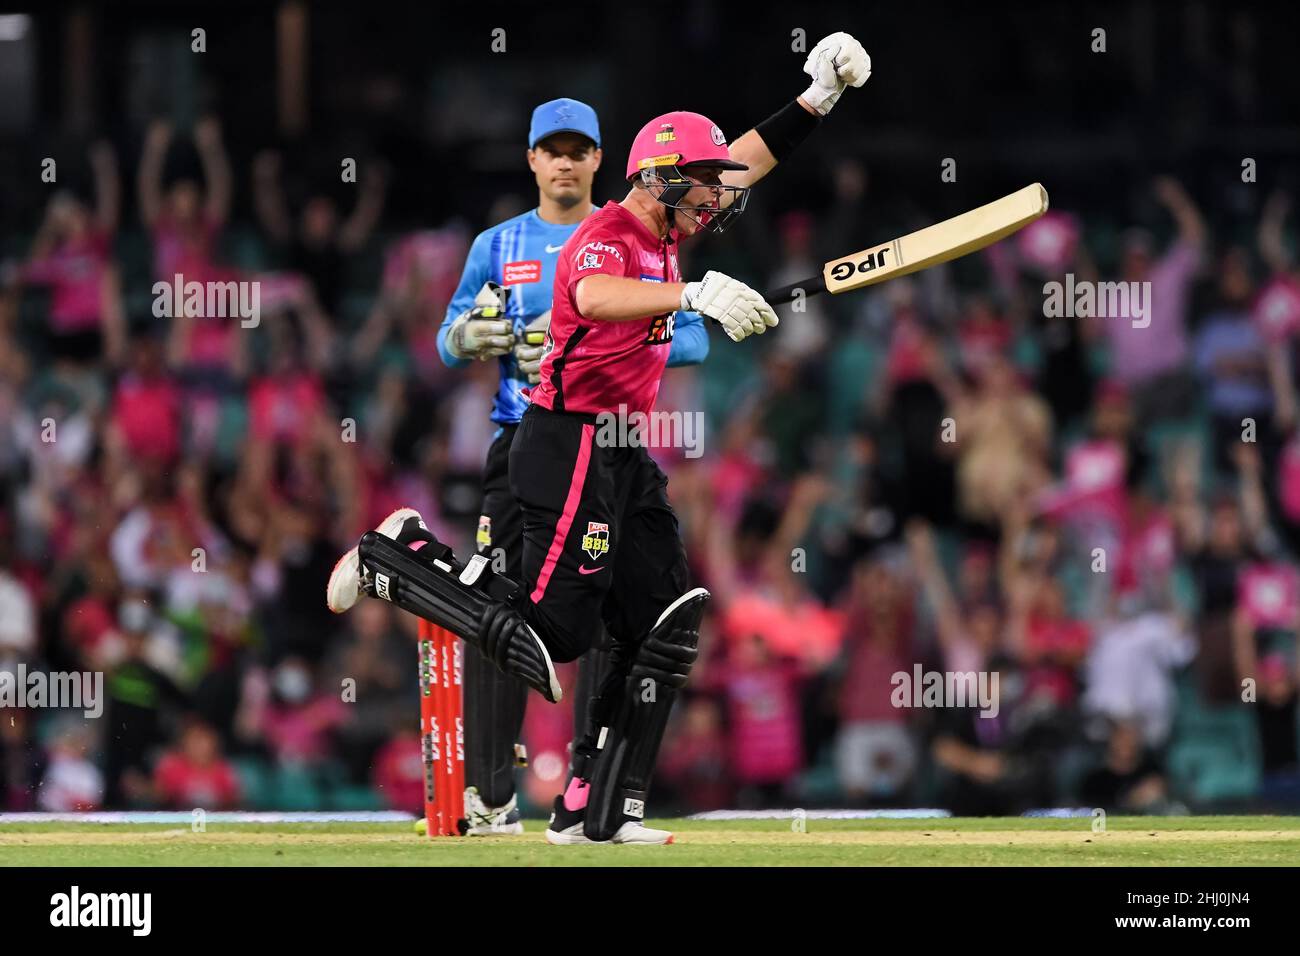 Sydney, Australia, 26 January, 2022. Hayden Kerr of the Sixers scores the winning runs during the Big Bash League Challenger cricket match between Sydney Sixers and Adelaide Strikers at The Sydney Cricket Ground on January 26, 2022 in Sydney, Australia. Credit: Steven Markham/Speed Media/Alamy Live News Stock Photo